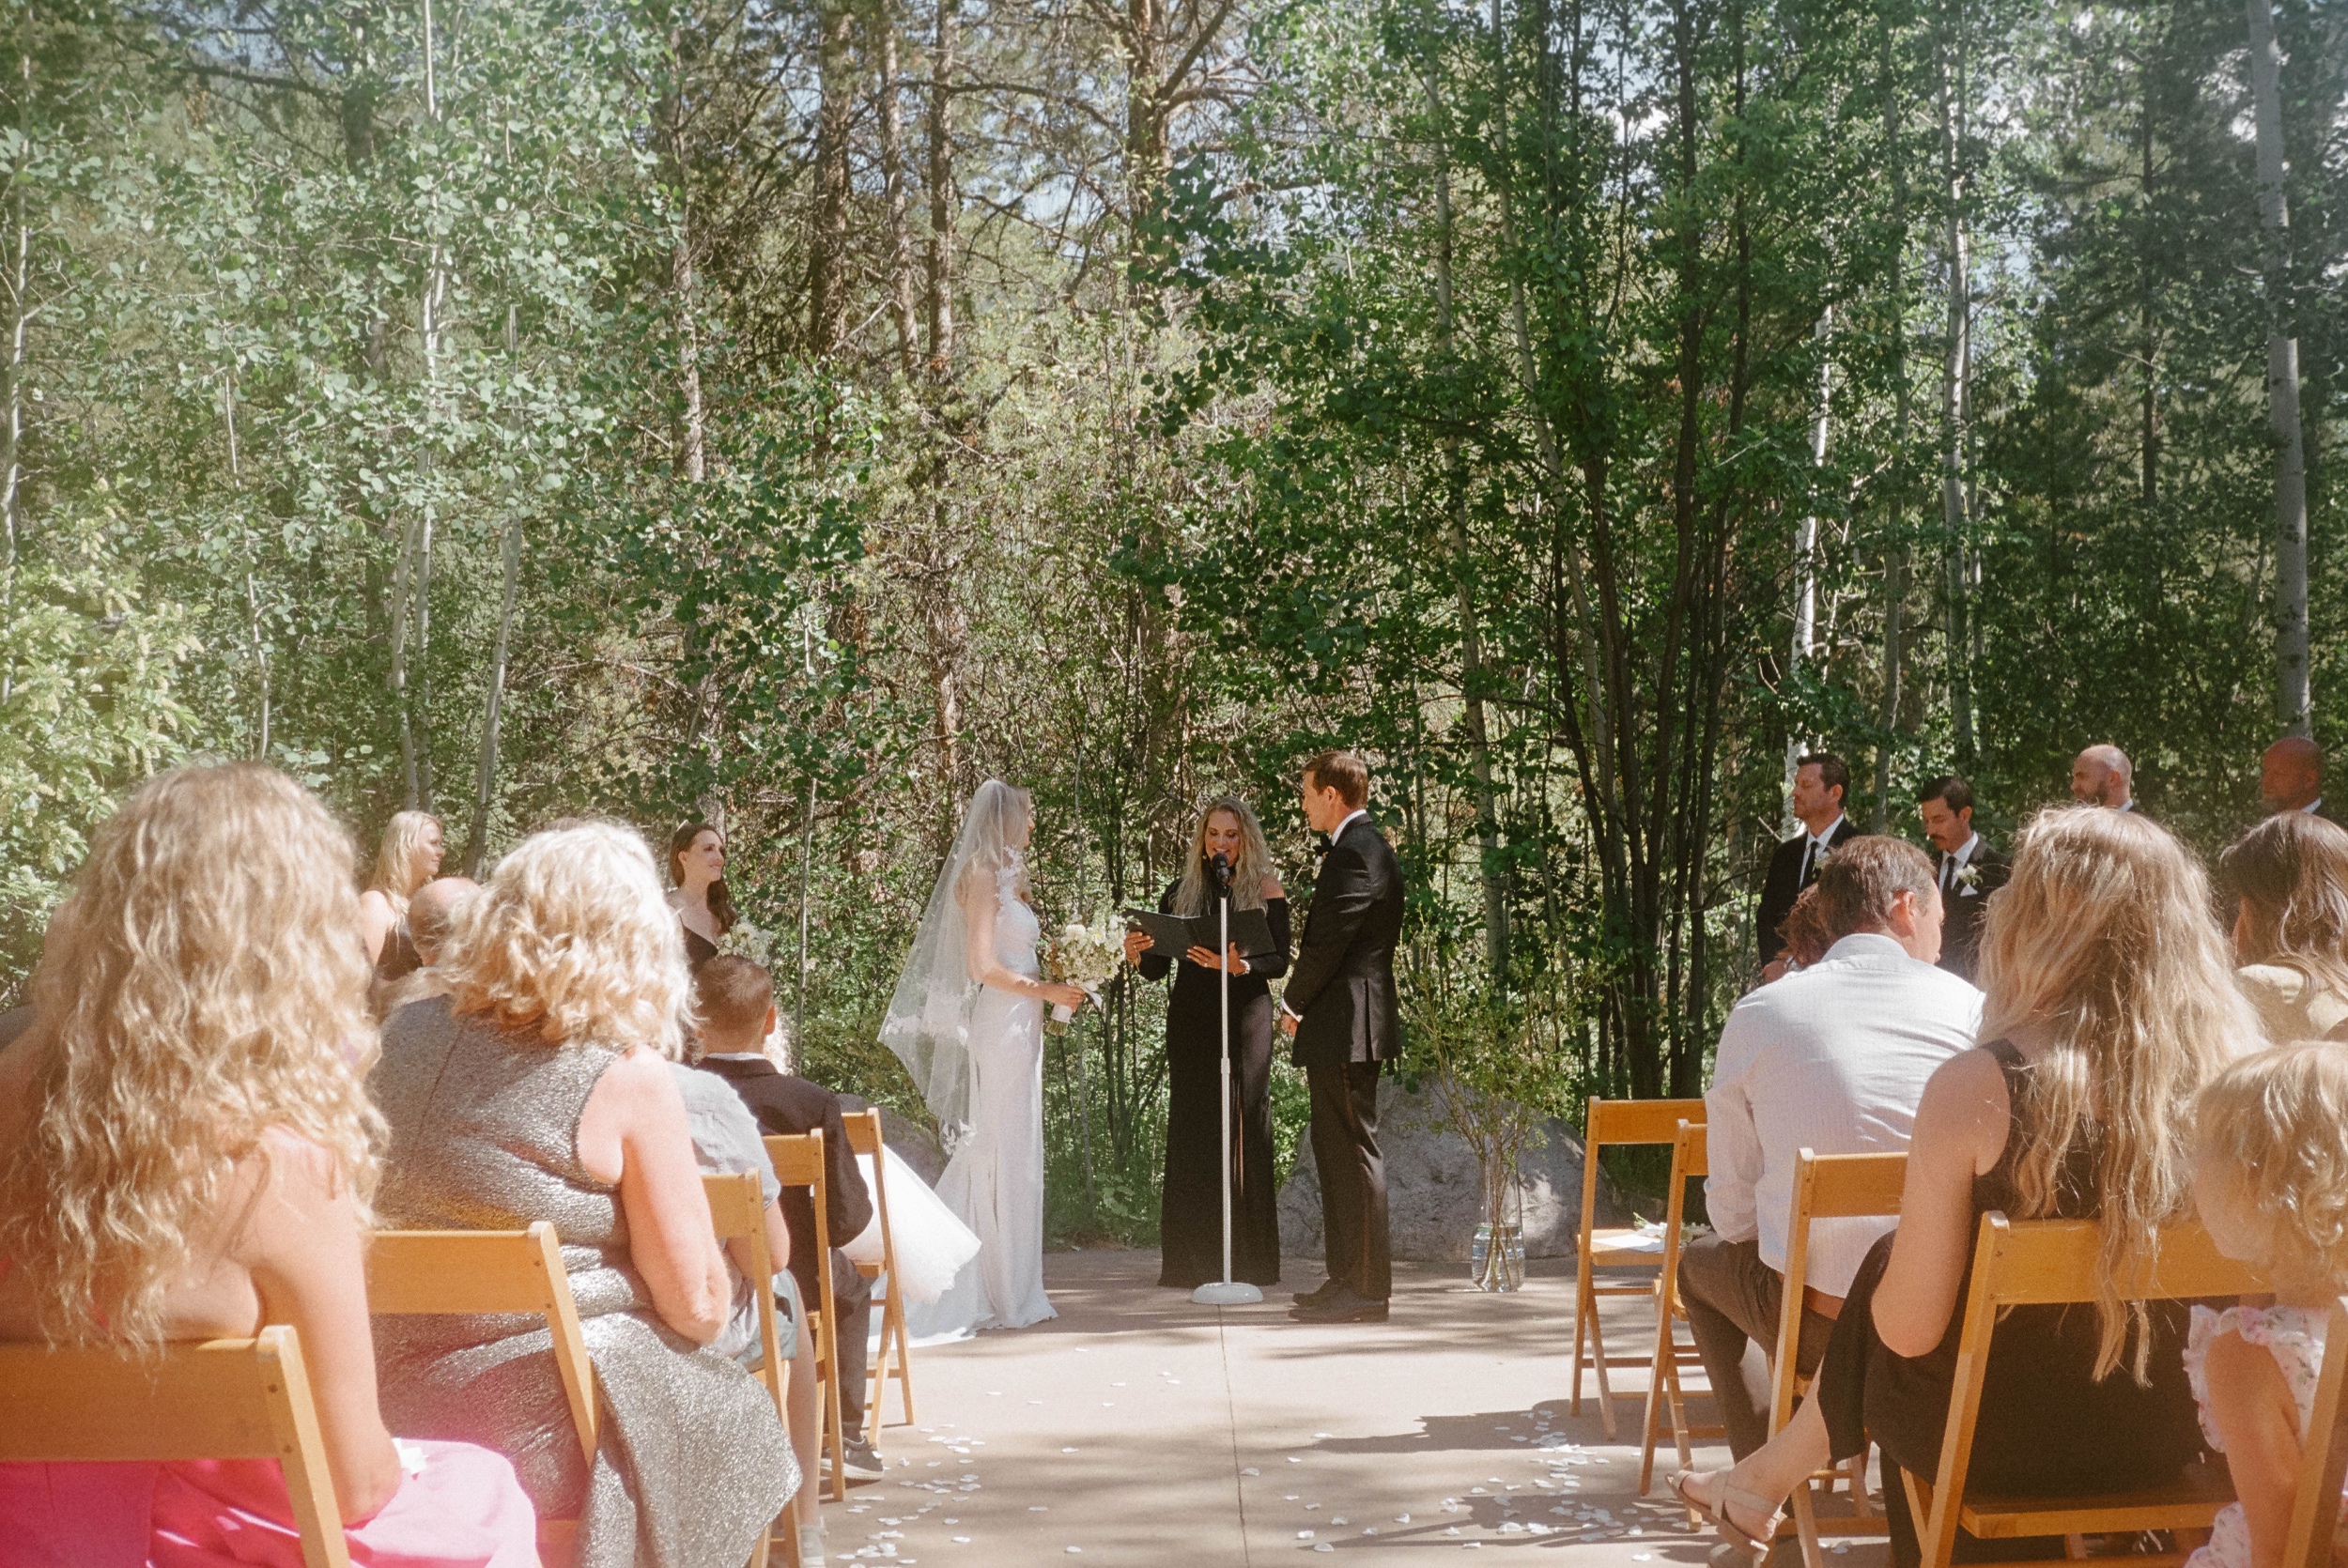 35mm film wedding photography provided by Colorado wedding photographer, Ashley Joyce Photography. 35mm film photos from a dreamy wedding at Donovan Pavilion in Vail, Colorado. 